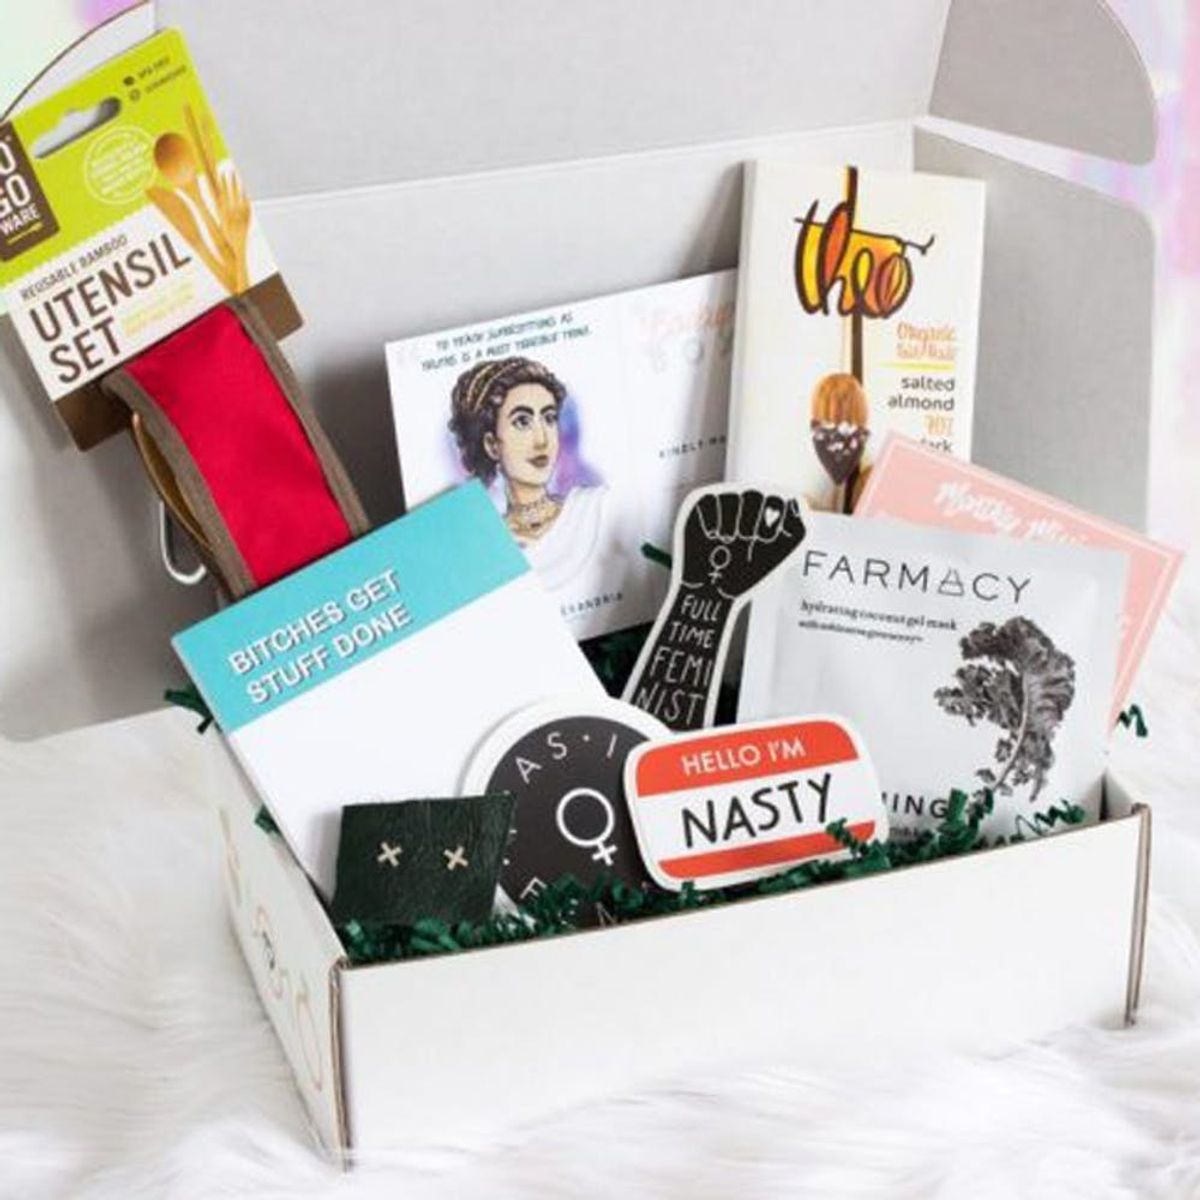 This Feminist Subscription Box Is the Monthly Splurge You Deserve